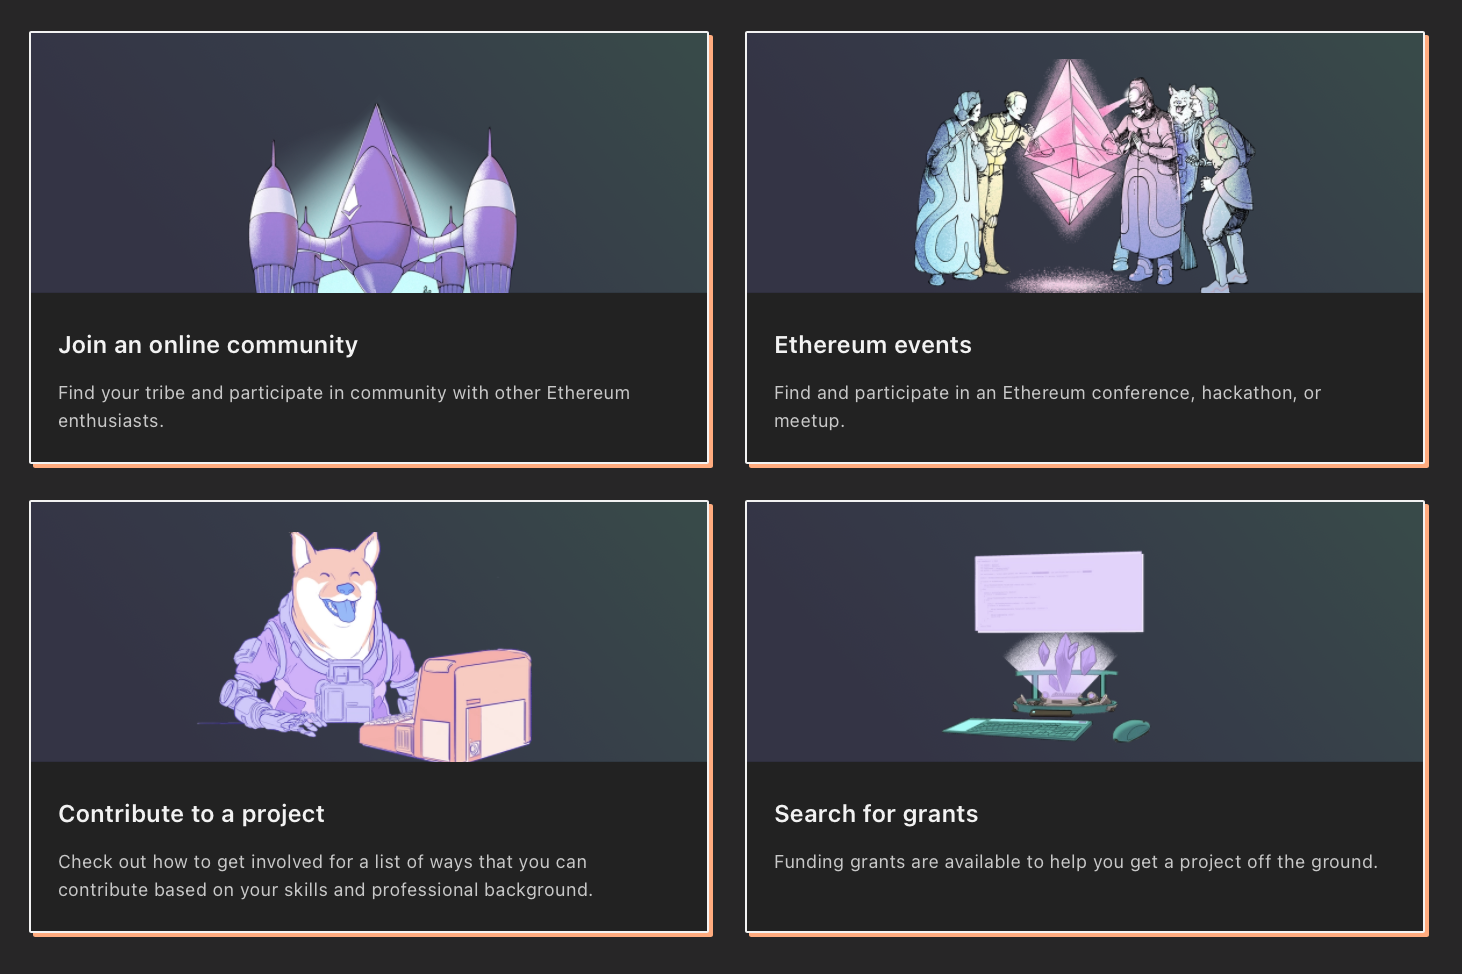 The screenshot from the Ethereum.org website